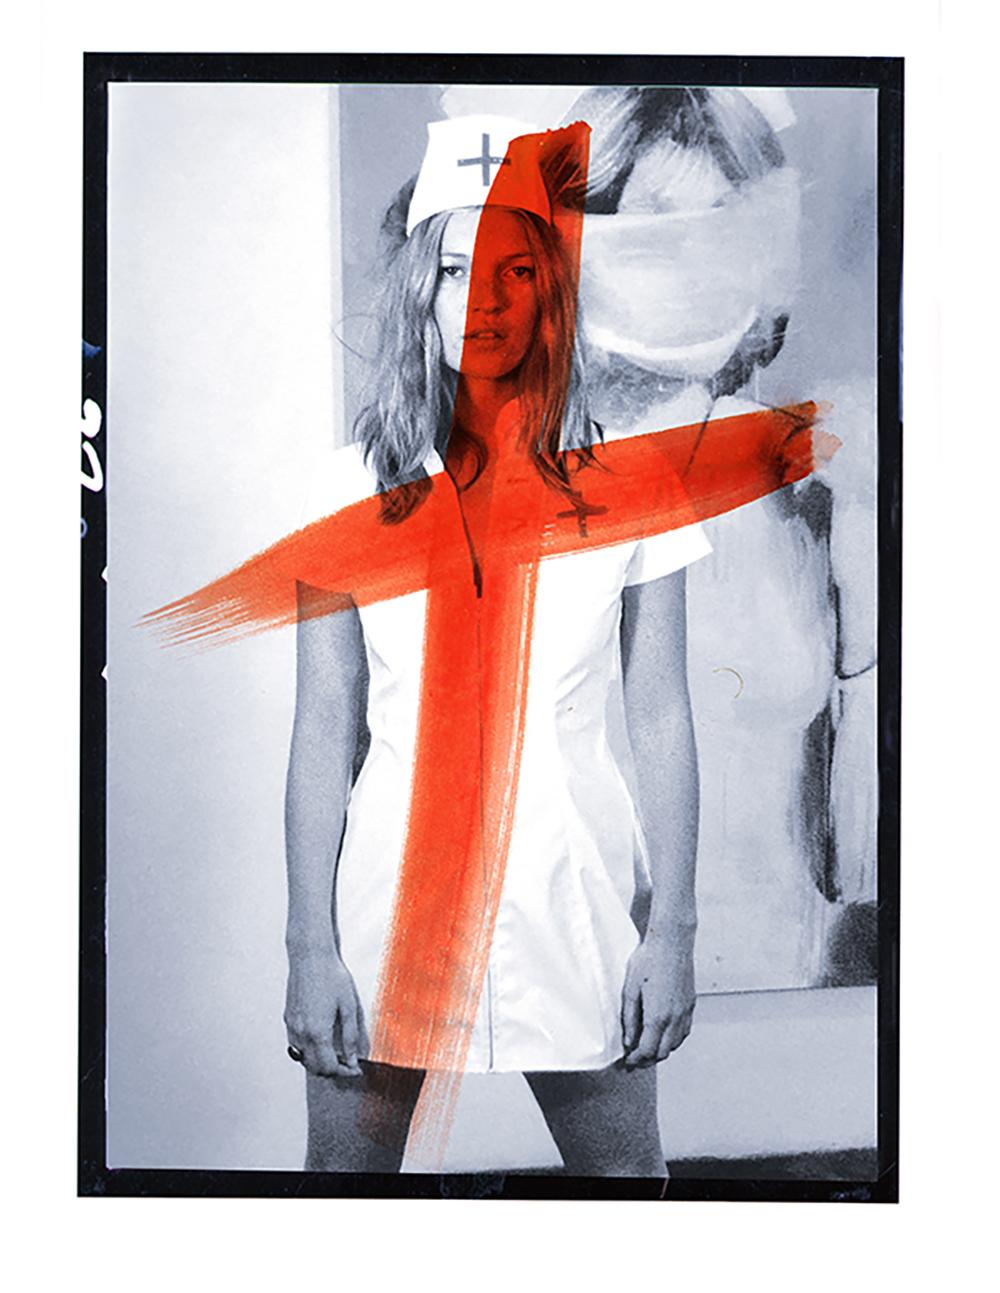  Kate Moss on the Cross - Print by Thomas Hussung